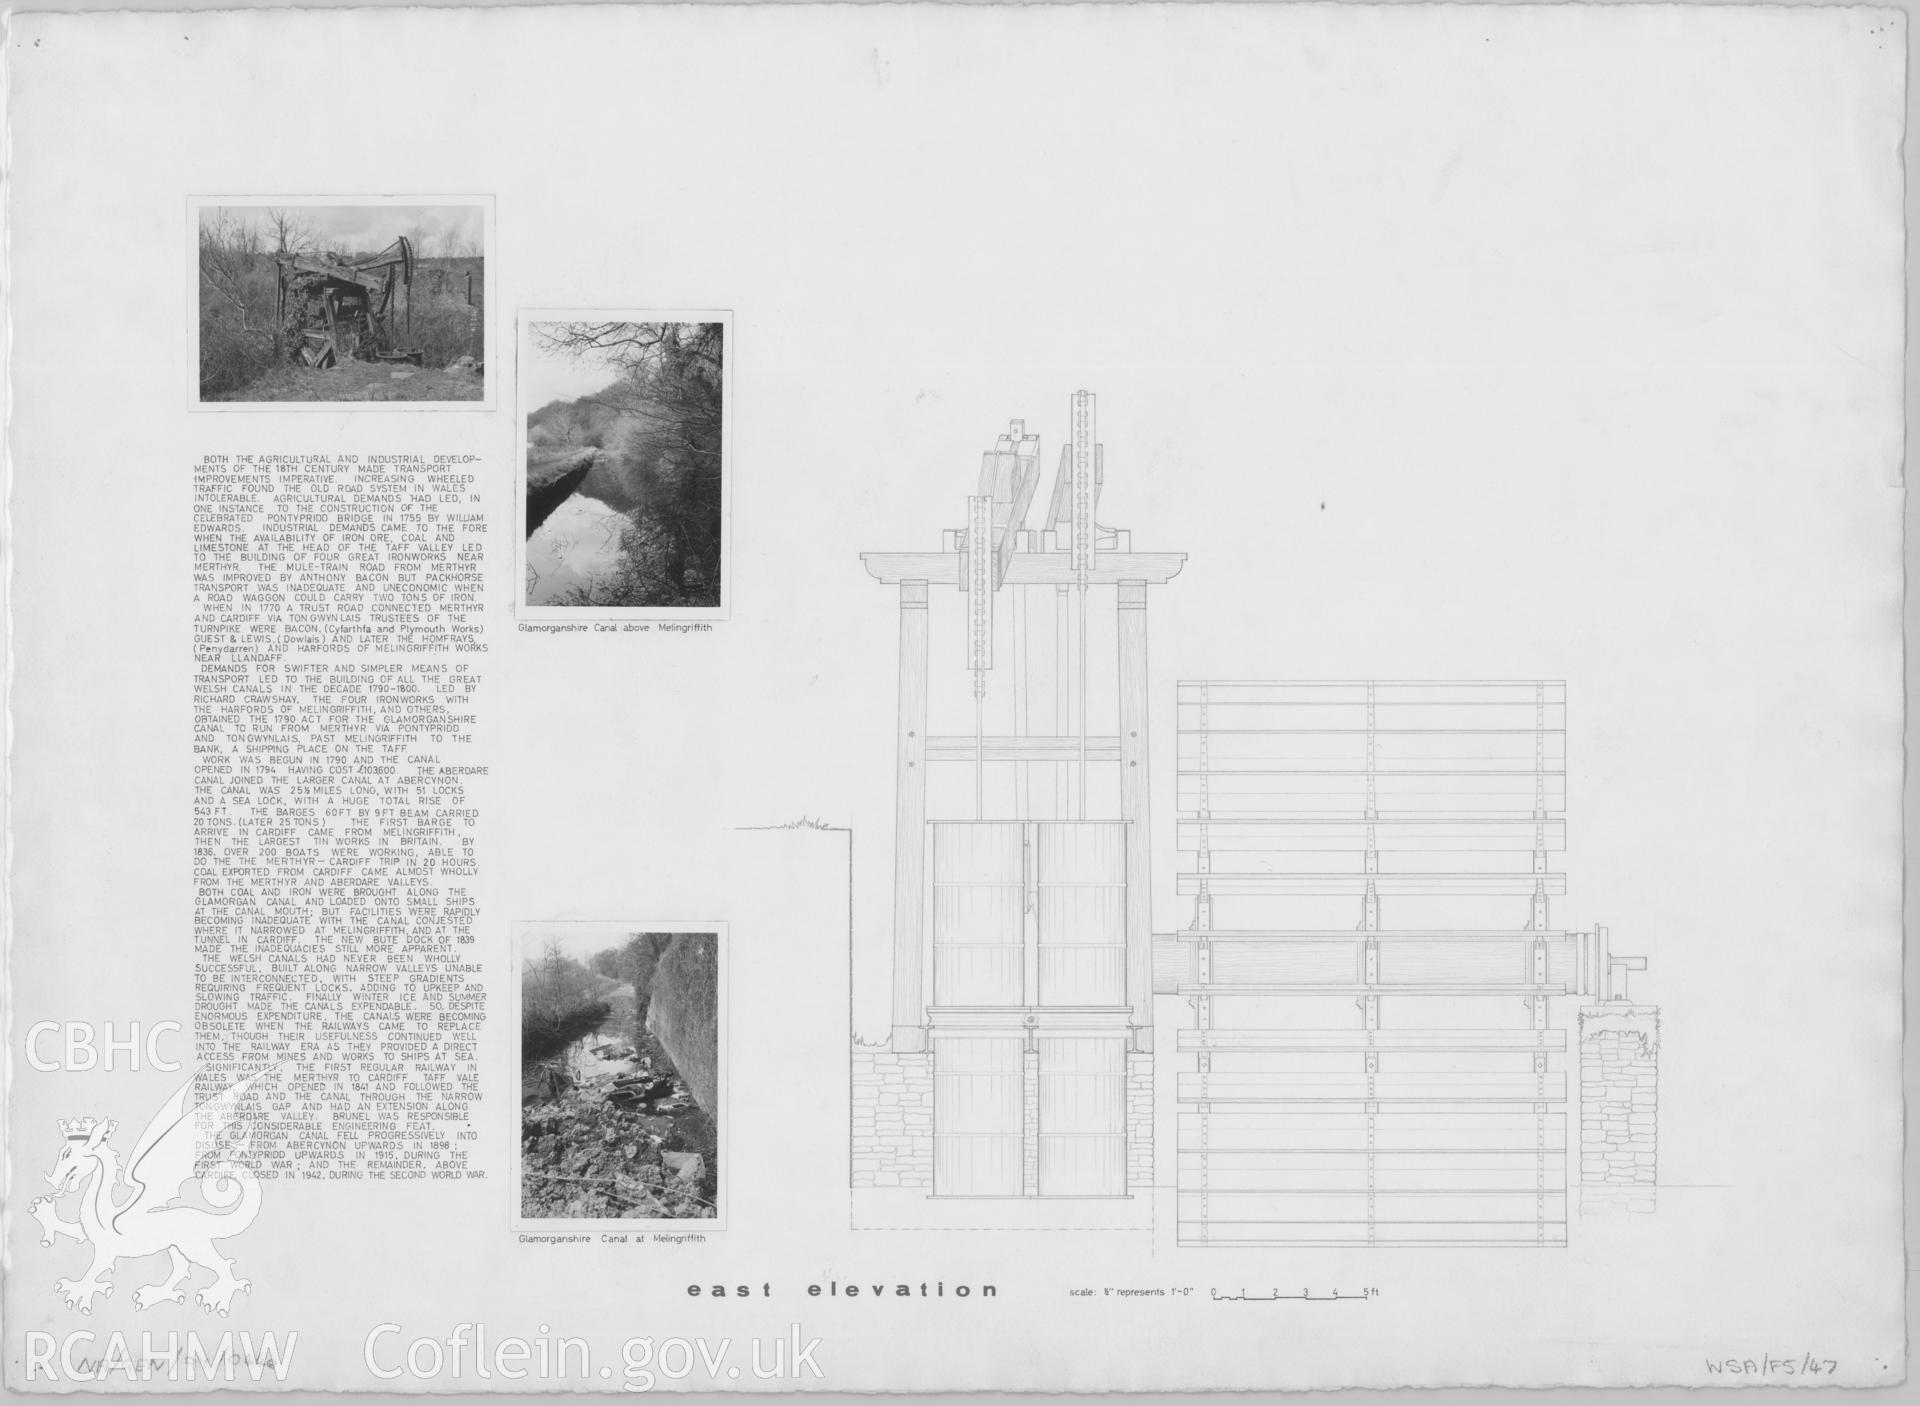 Measured drawing showing east elevation and three B&W photos of Melingriffith Water Pump, produced by R.V. Bayliss and I. Payne, undated.